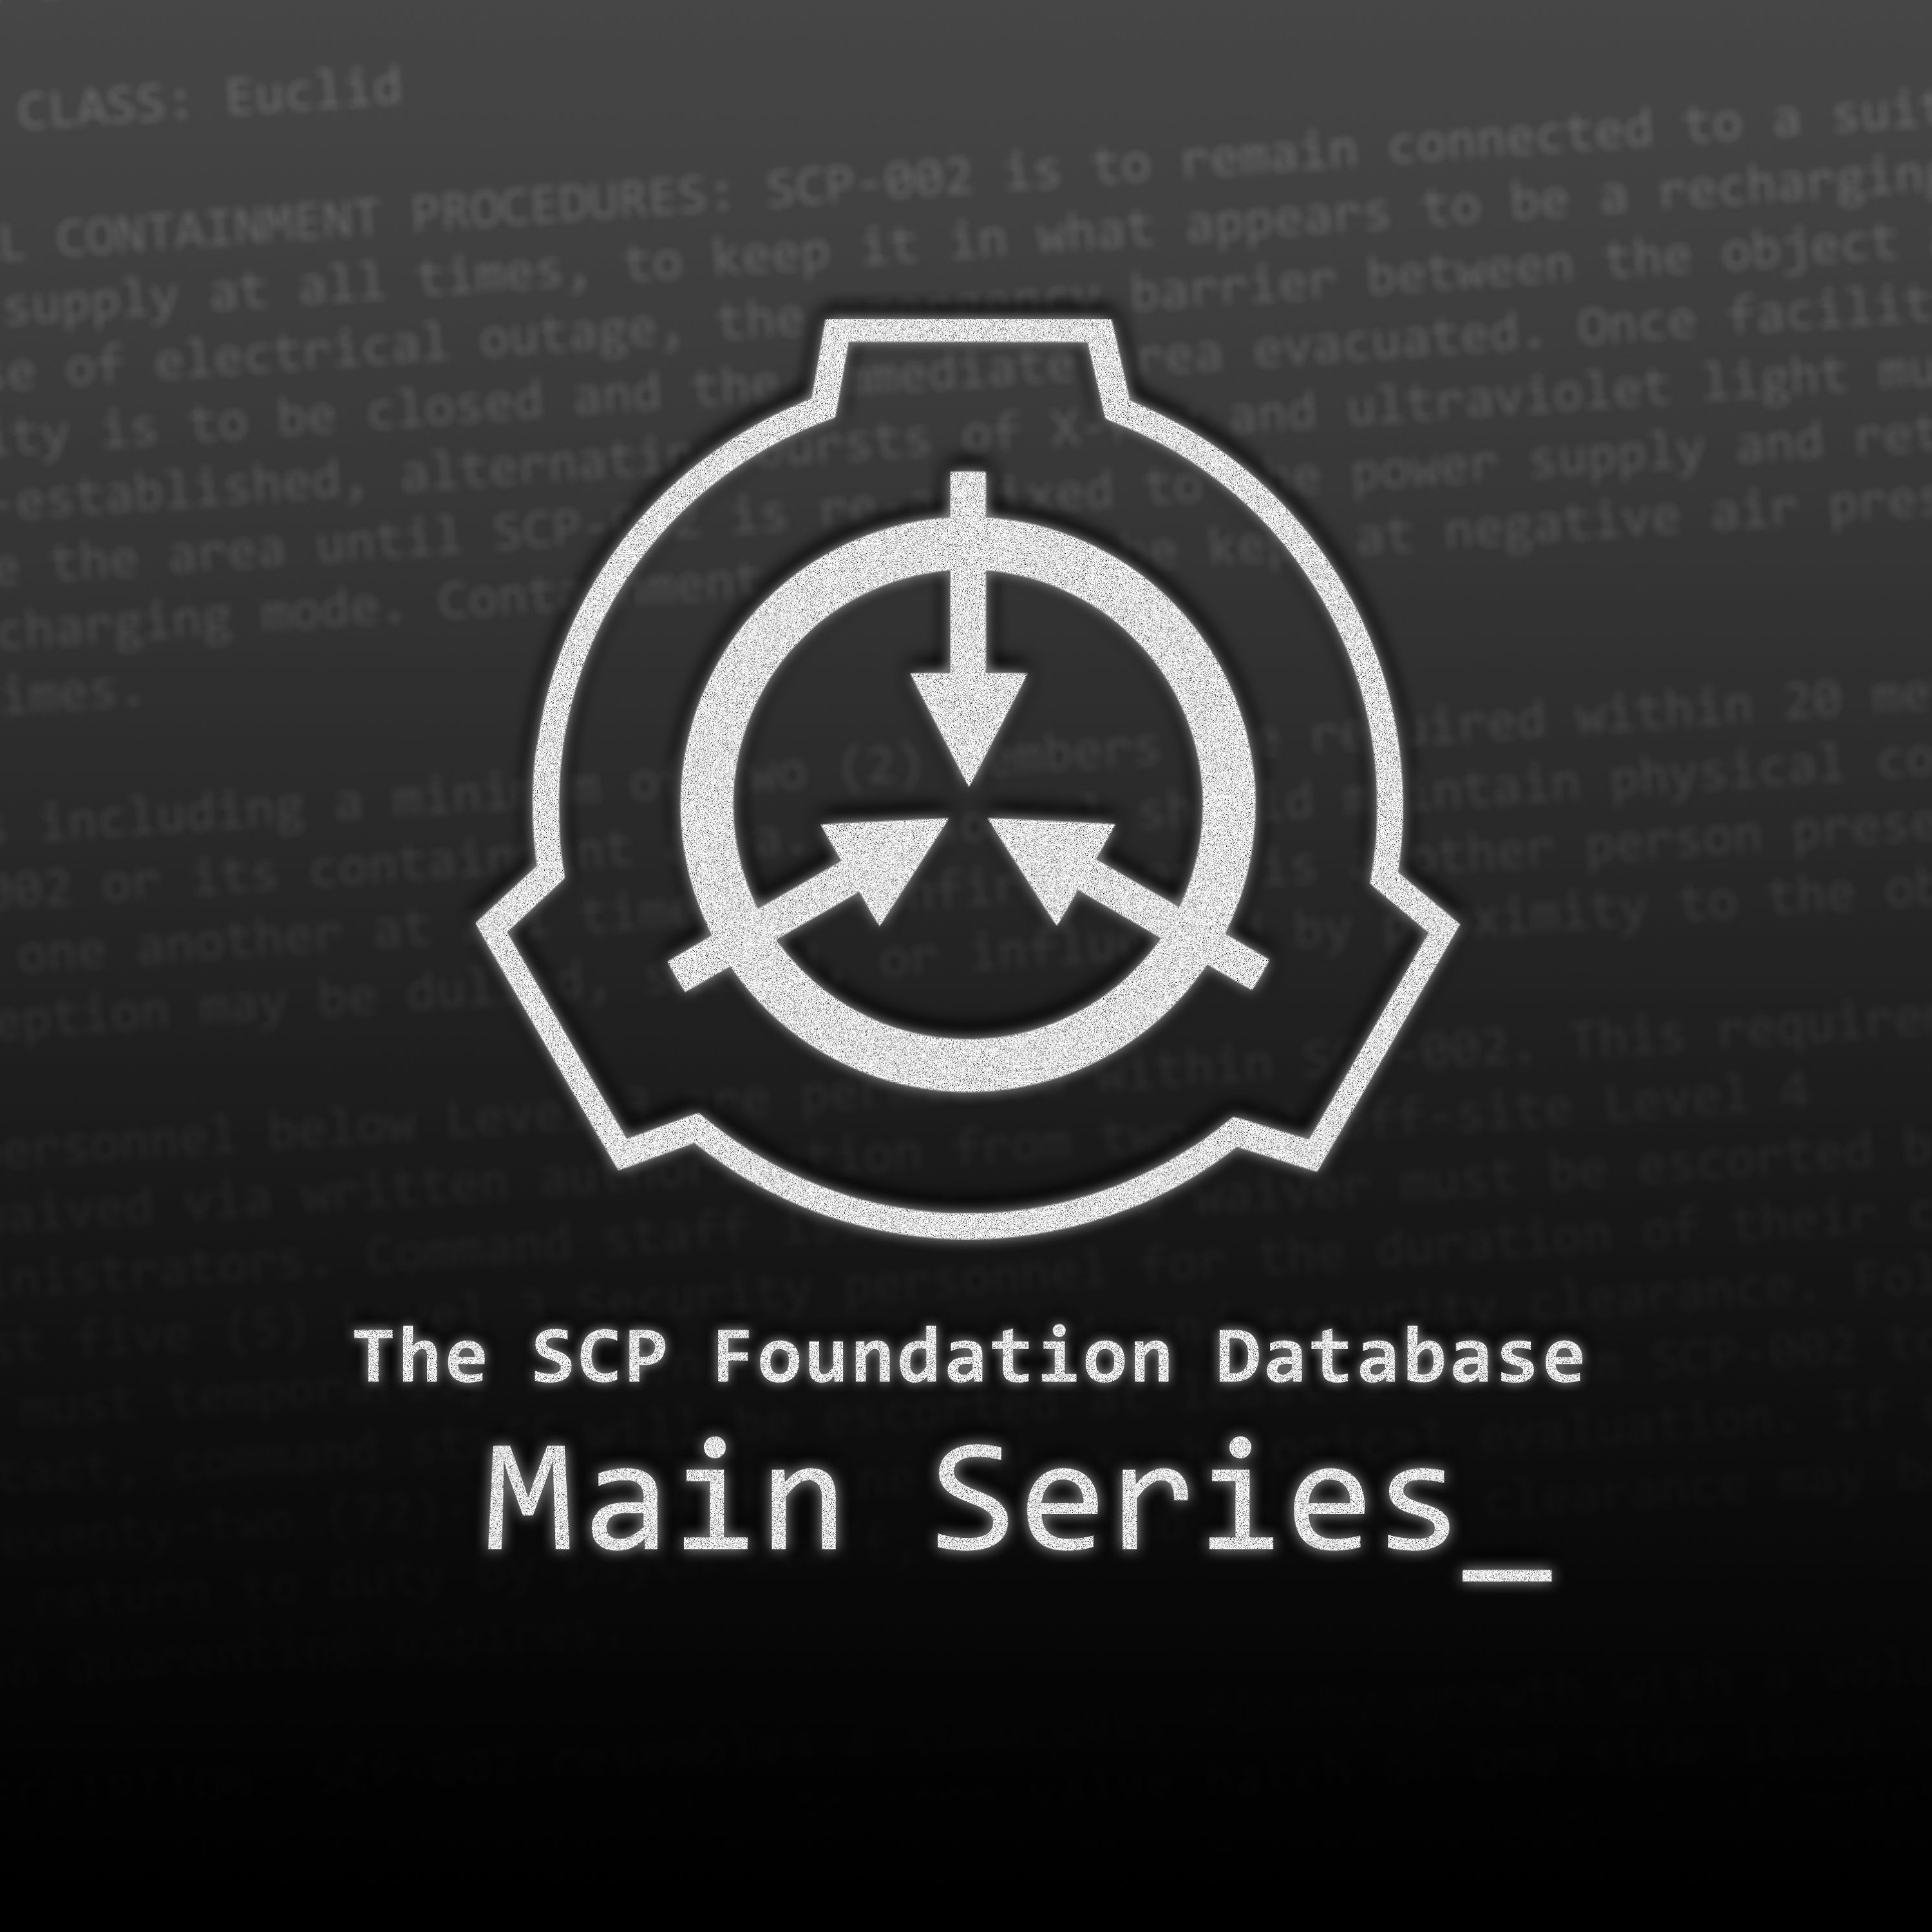 SCP-008-J - Geoff - The SCP Foundation Database